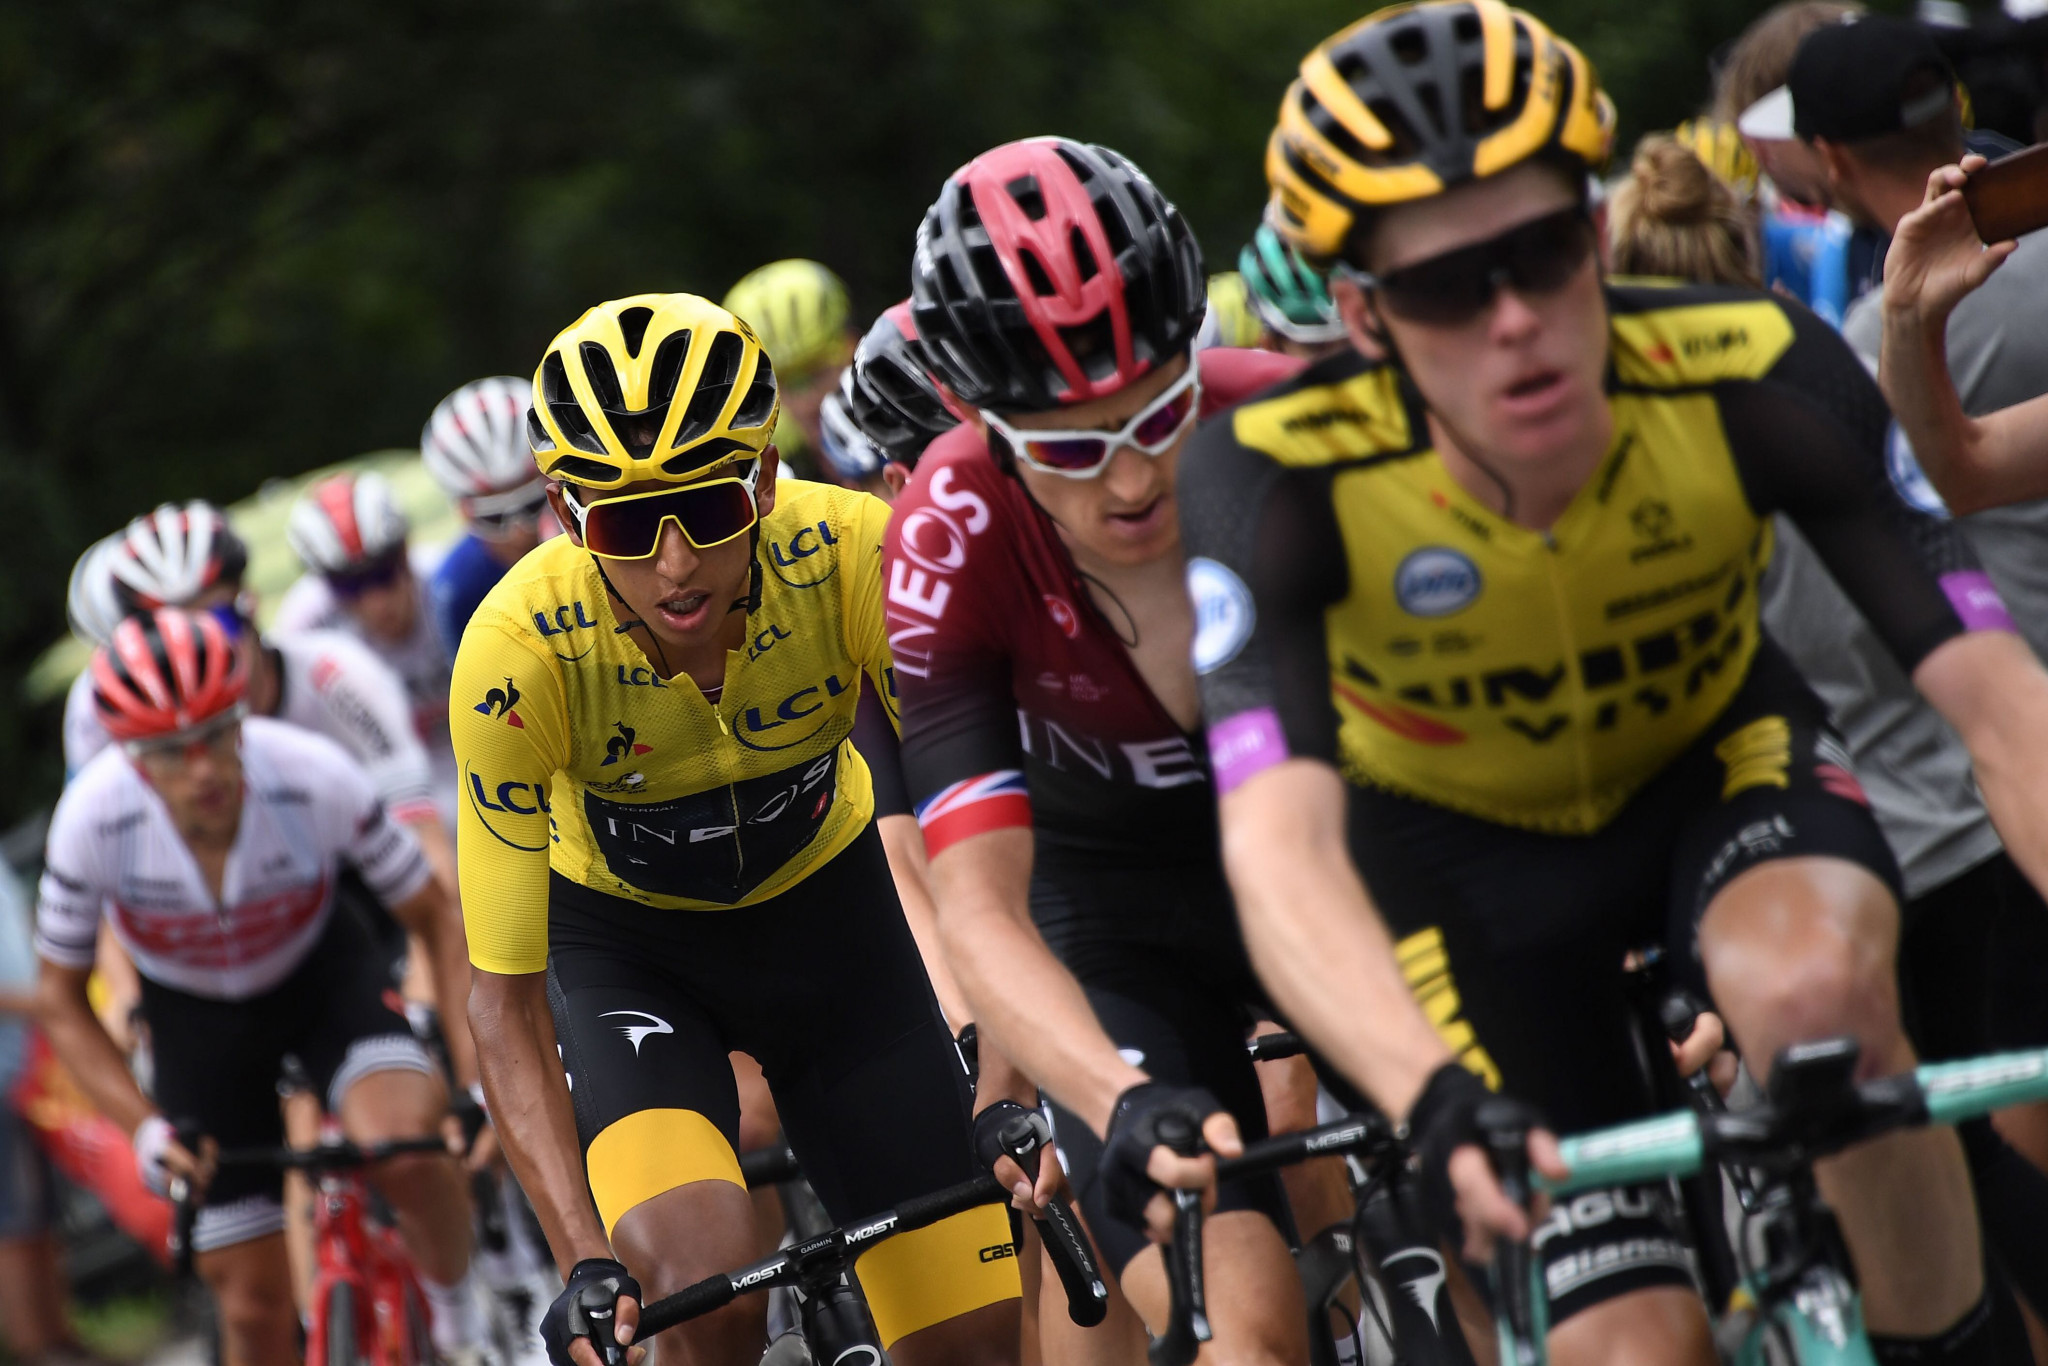 Egan Bernal will be confirmed as champion at the end of tomorrow's final stage ©Getty Images